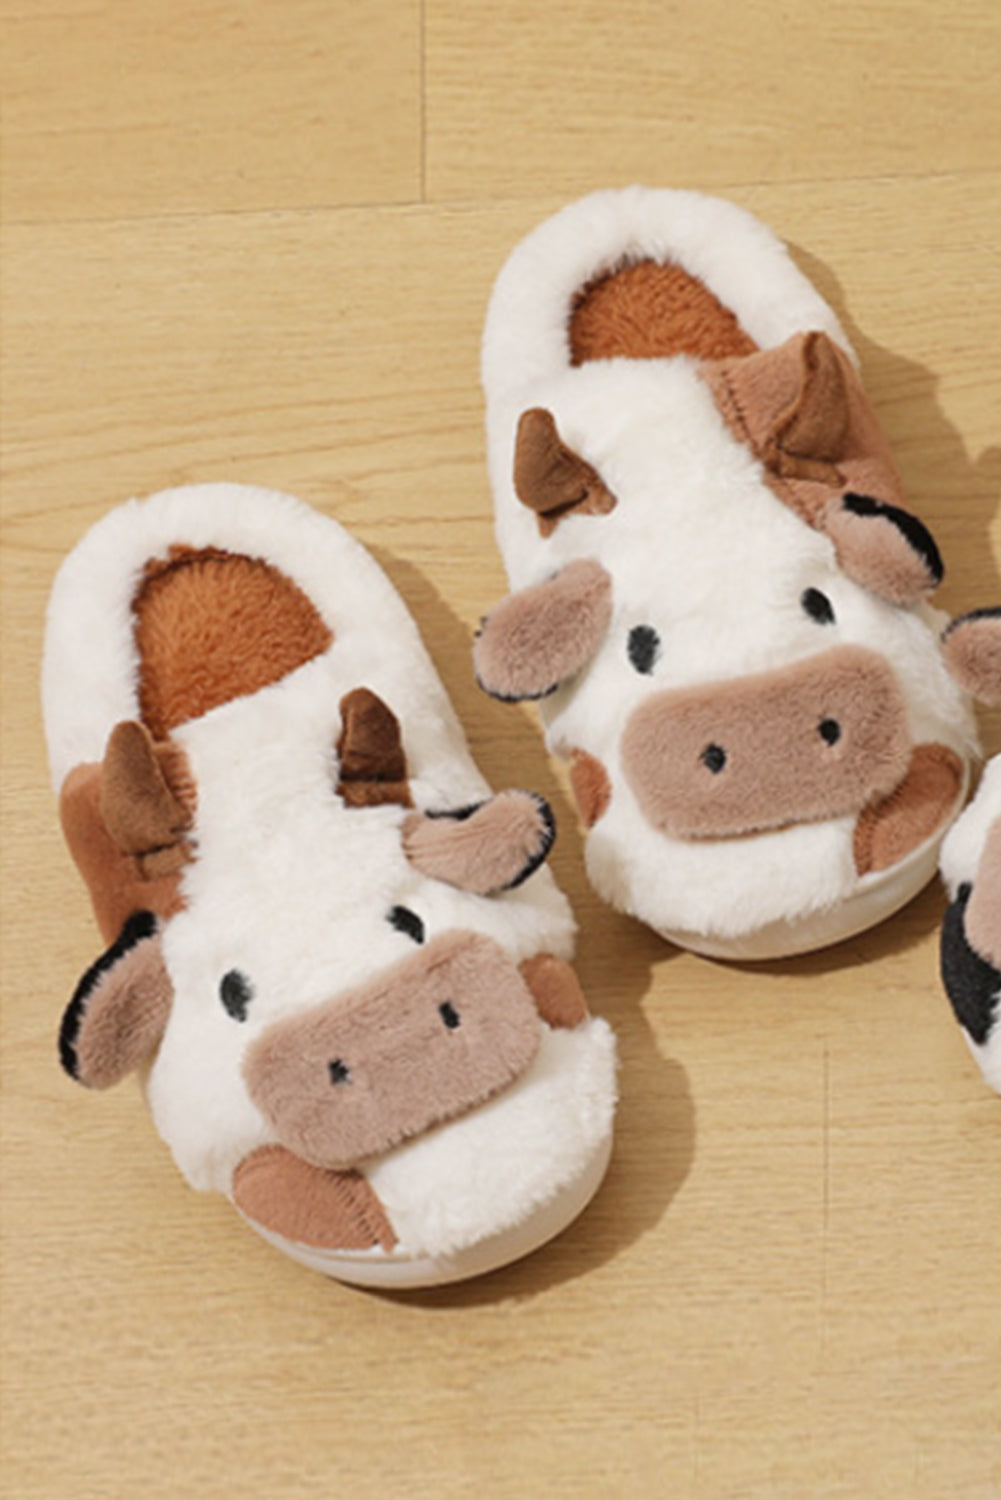 Camel Cartoon Cow Pattern Plush Lined Slippers